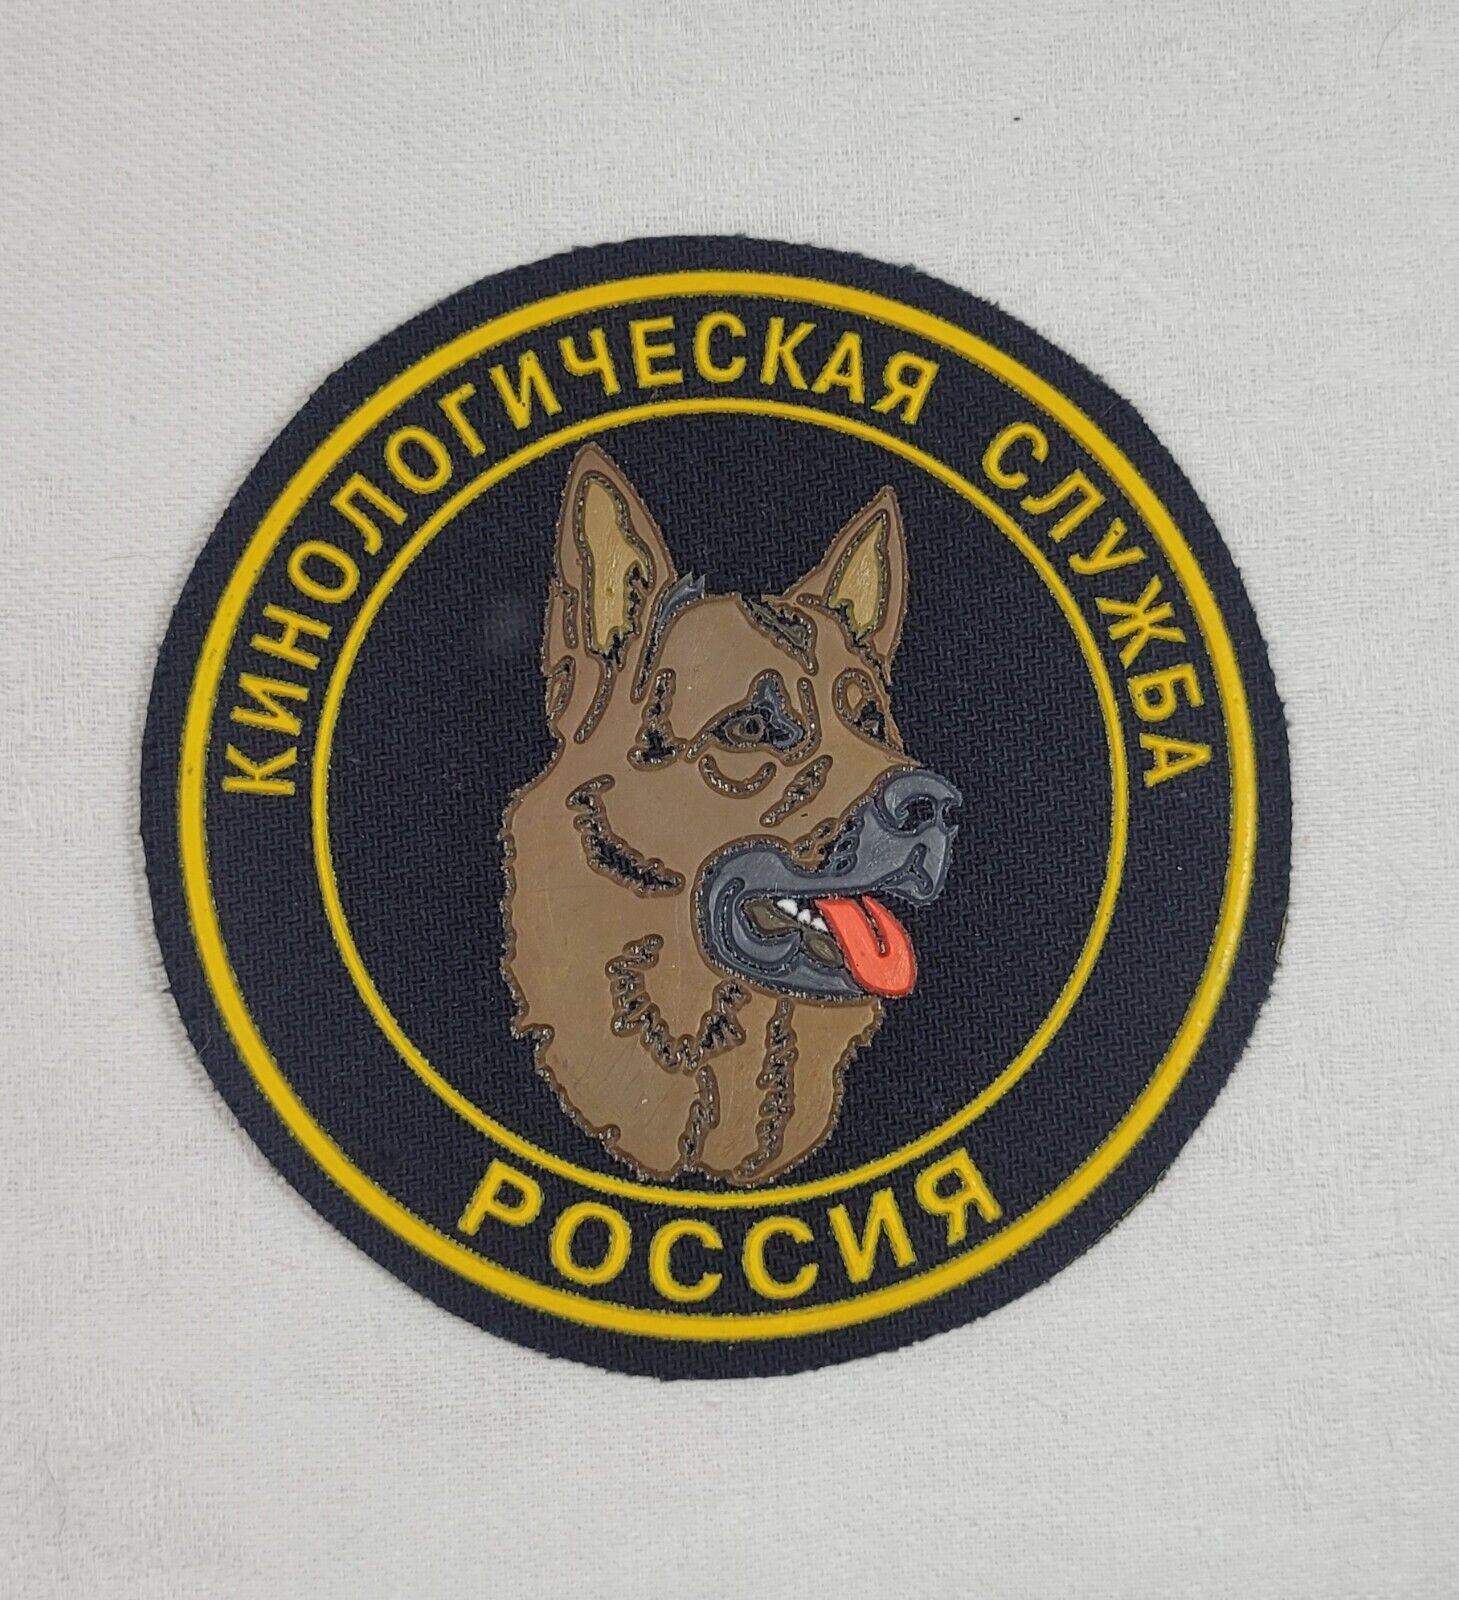 RUSSIAN ARMY / MILITARY / POLICE K9 DOG FORCES DEPT GERMAN SHEPHERD RUSSIA PATCH